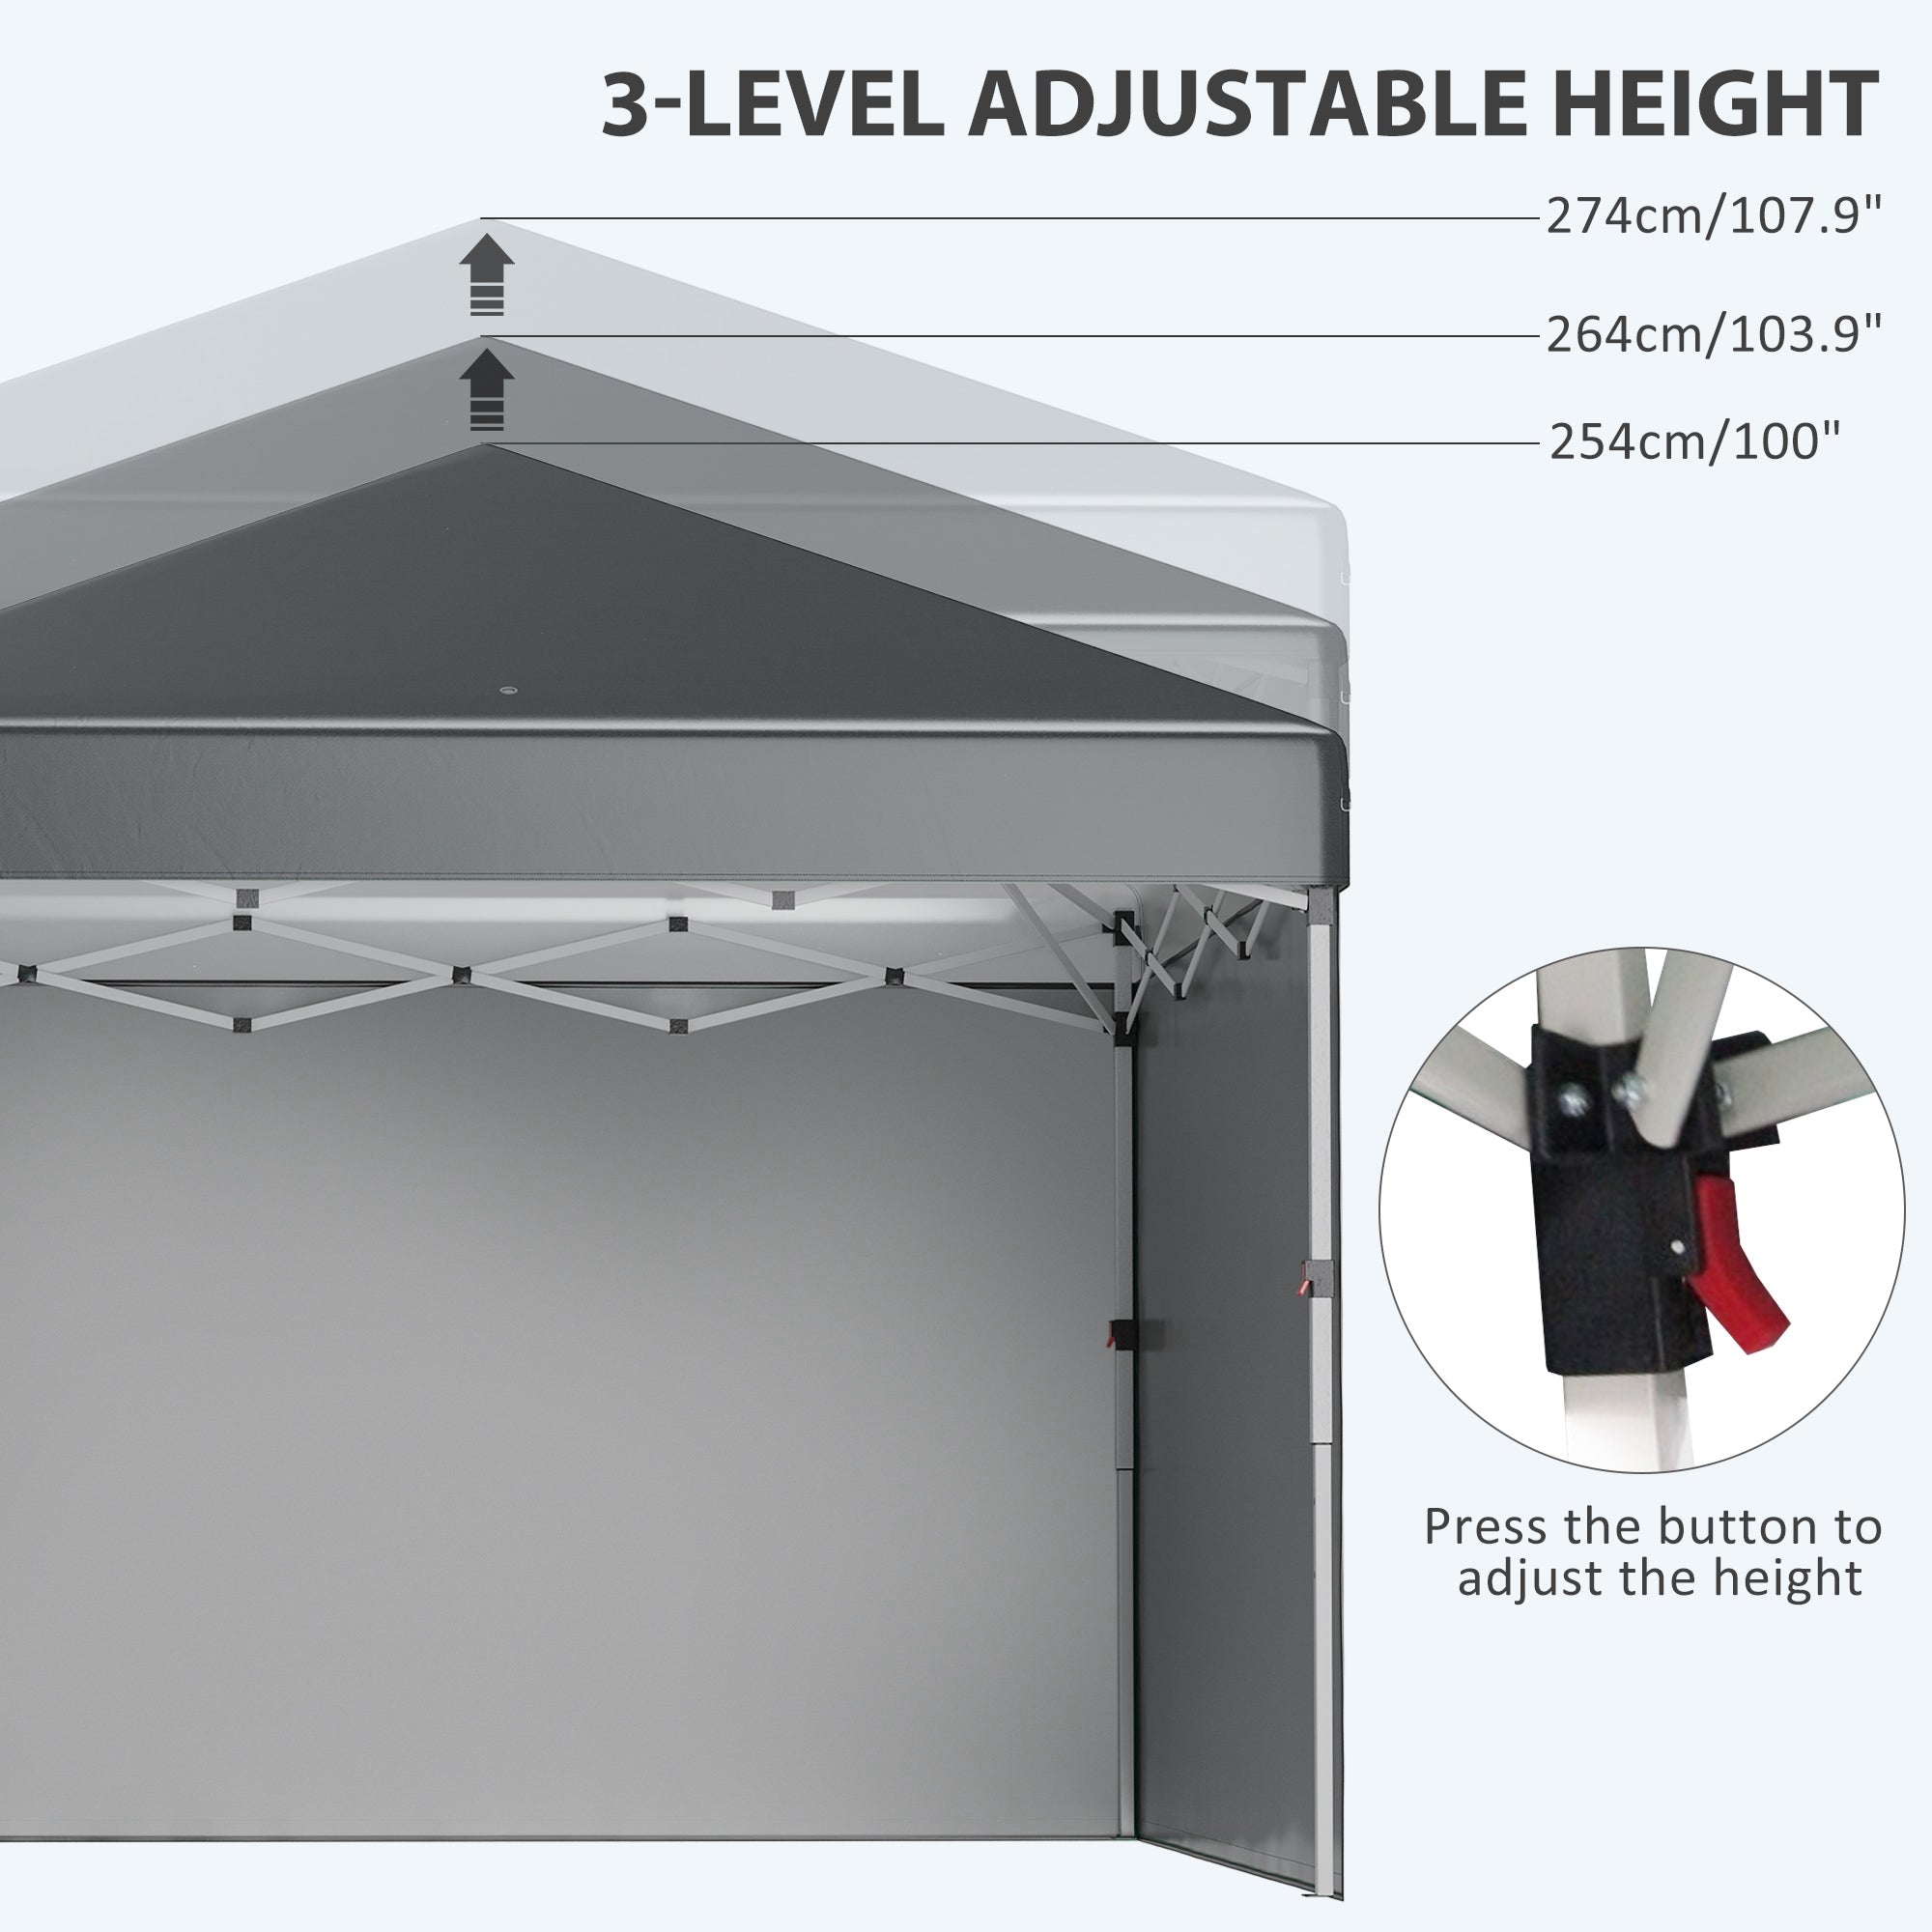 3 x 3 (M) Pop Up Gazebo with 2 Sidewalls, Leg Weight Bags and Carry Bag, Height Adjustable Party Tent Event Shelter for Garden, Dark Grey-4